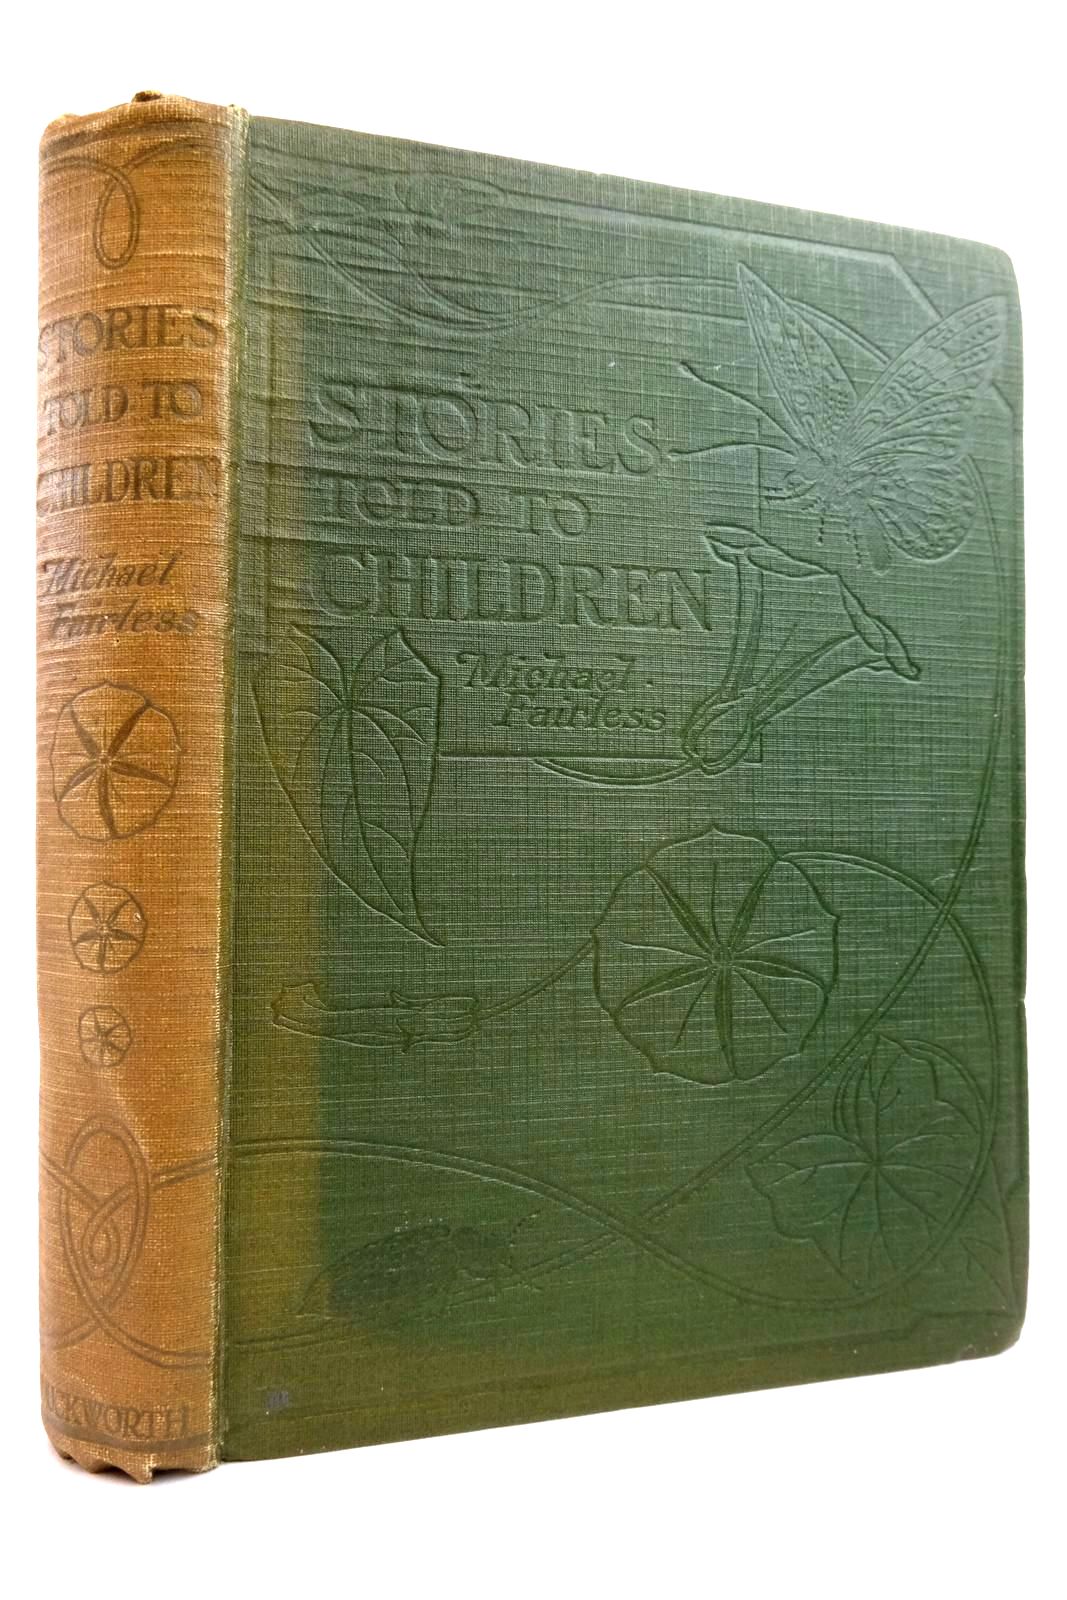 Photo of STORIES TOLD TO CHILDREN written by Fairless, Michael illustrated by White, Flora published by Duckworth &amp; Co. (STOCK CODE: 2135604)  for sale by Stella & Rose's Books